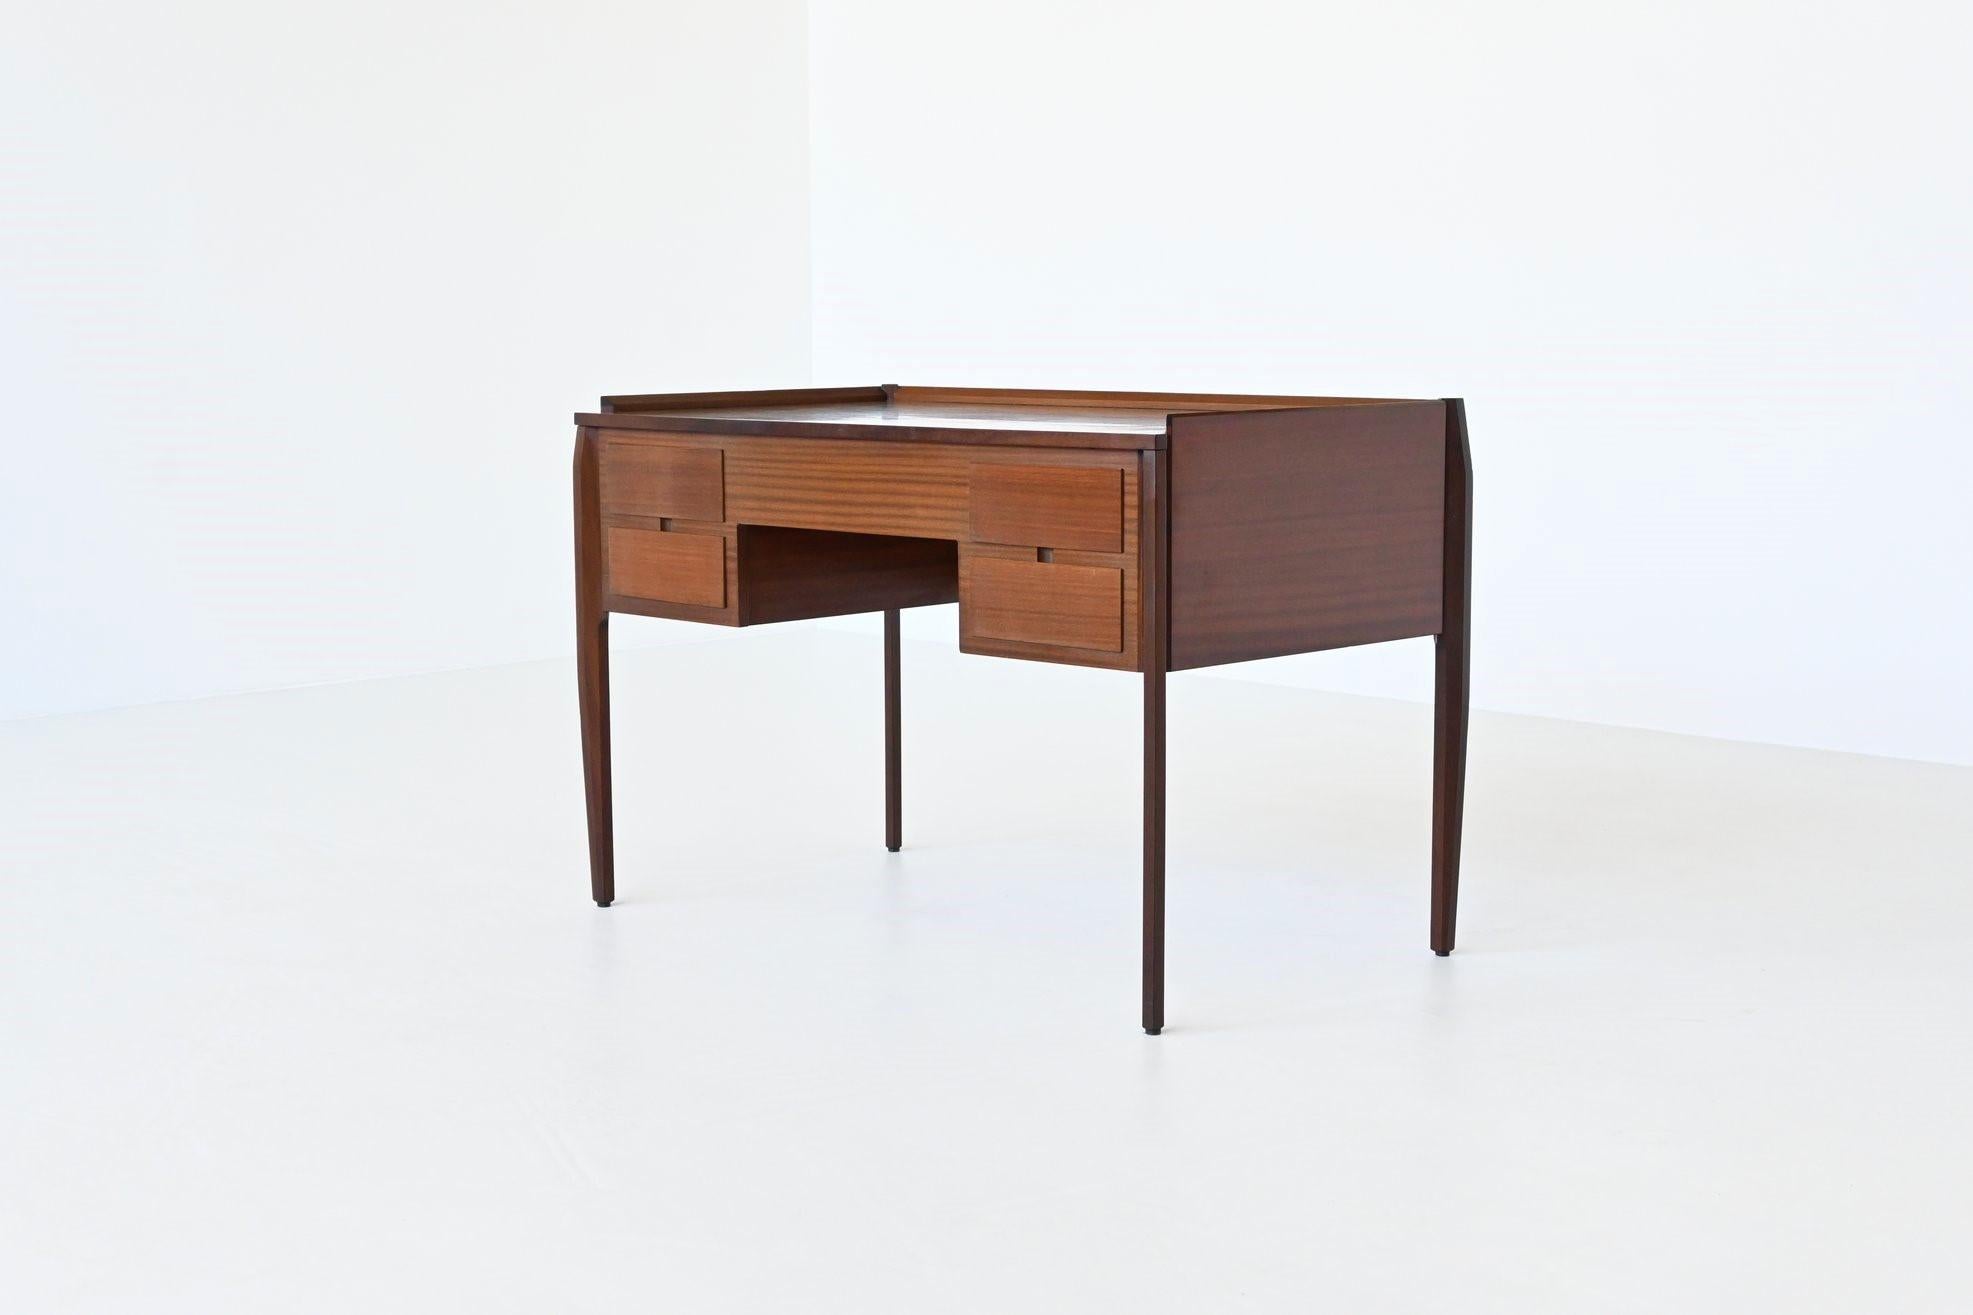 Beautiful shaped and lightweight desk designed by Gio Ponti for Vittorio Dassi, Italy 1960. This well-crafted symmetric desk is made of veneered mahogany Sapele wood and has a very nice striped grain. The desk has four deep drawers with blind